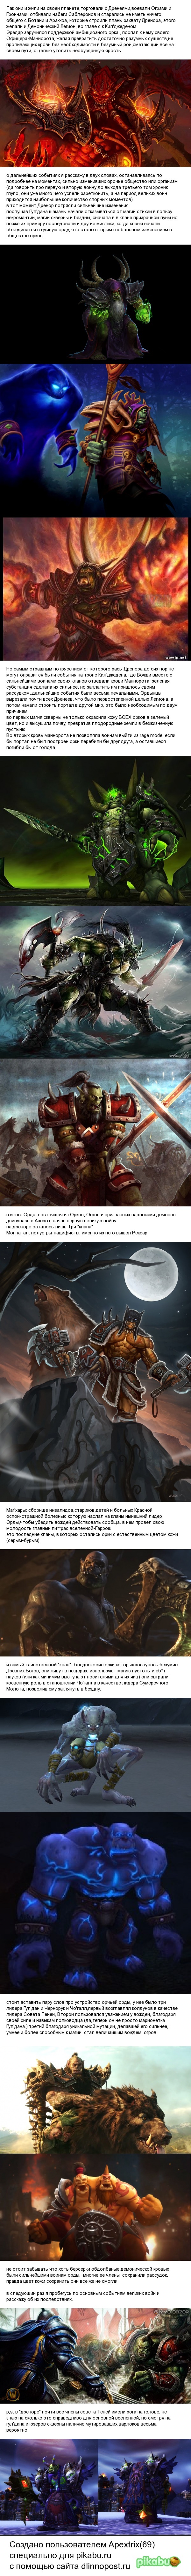 Orc Parsing: The Origins of the Various Orcs in the Warcraft Universe (Part 3) - My, World of warcraft, Warcraft, Warcraft 3, Orcs, Magic, Fantasy, Lore of the universe, MMORPG, Longpost